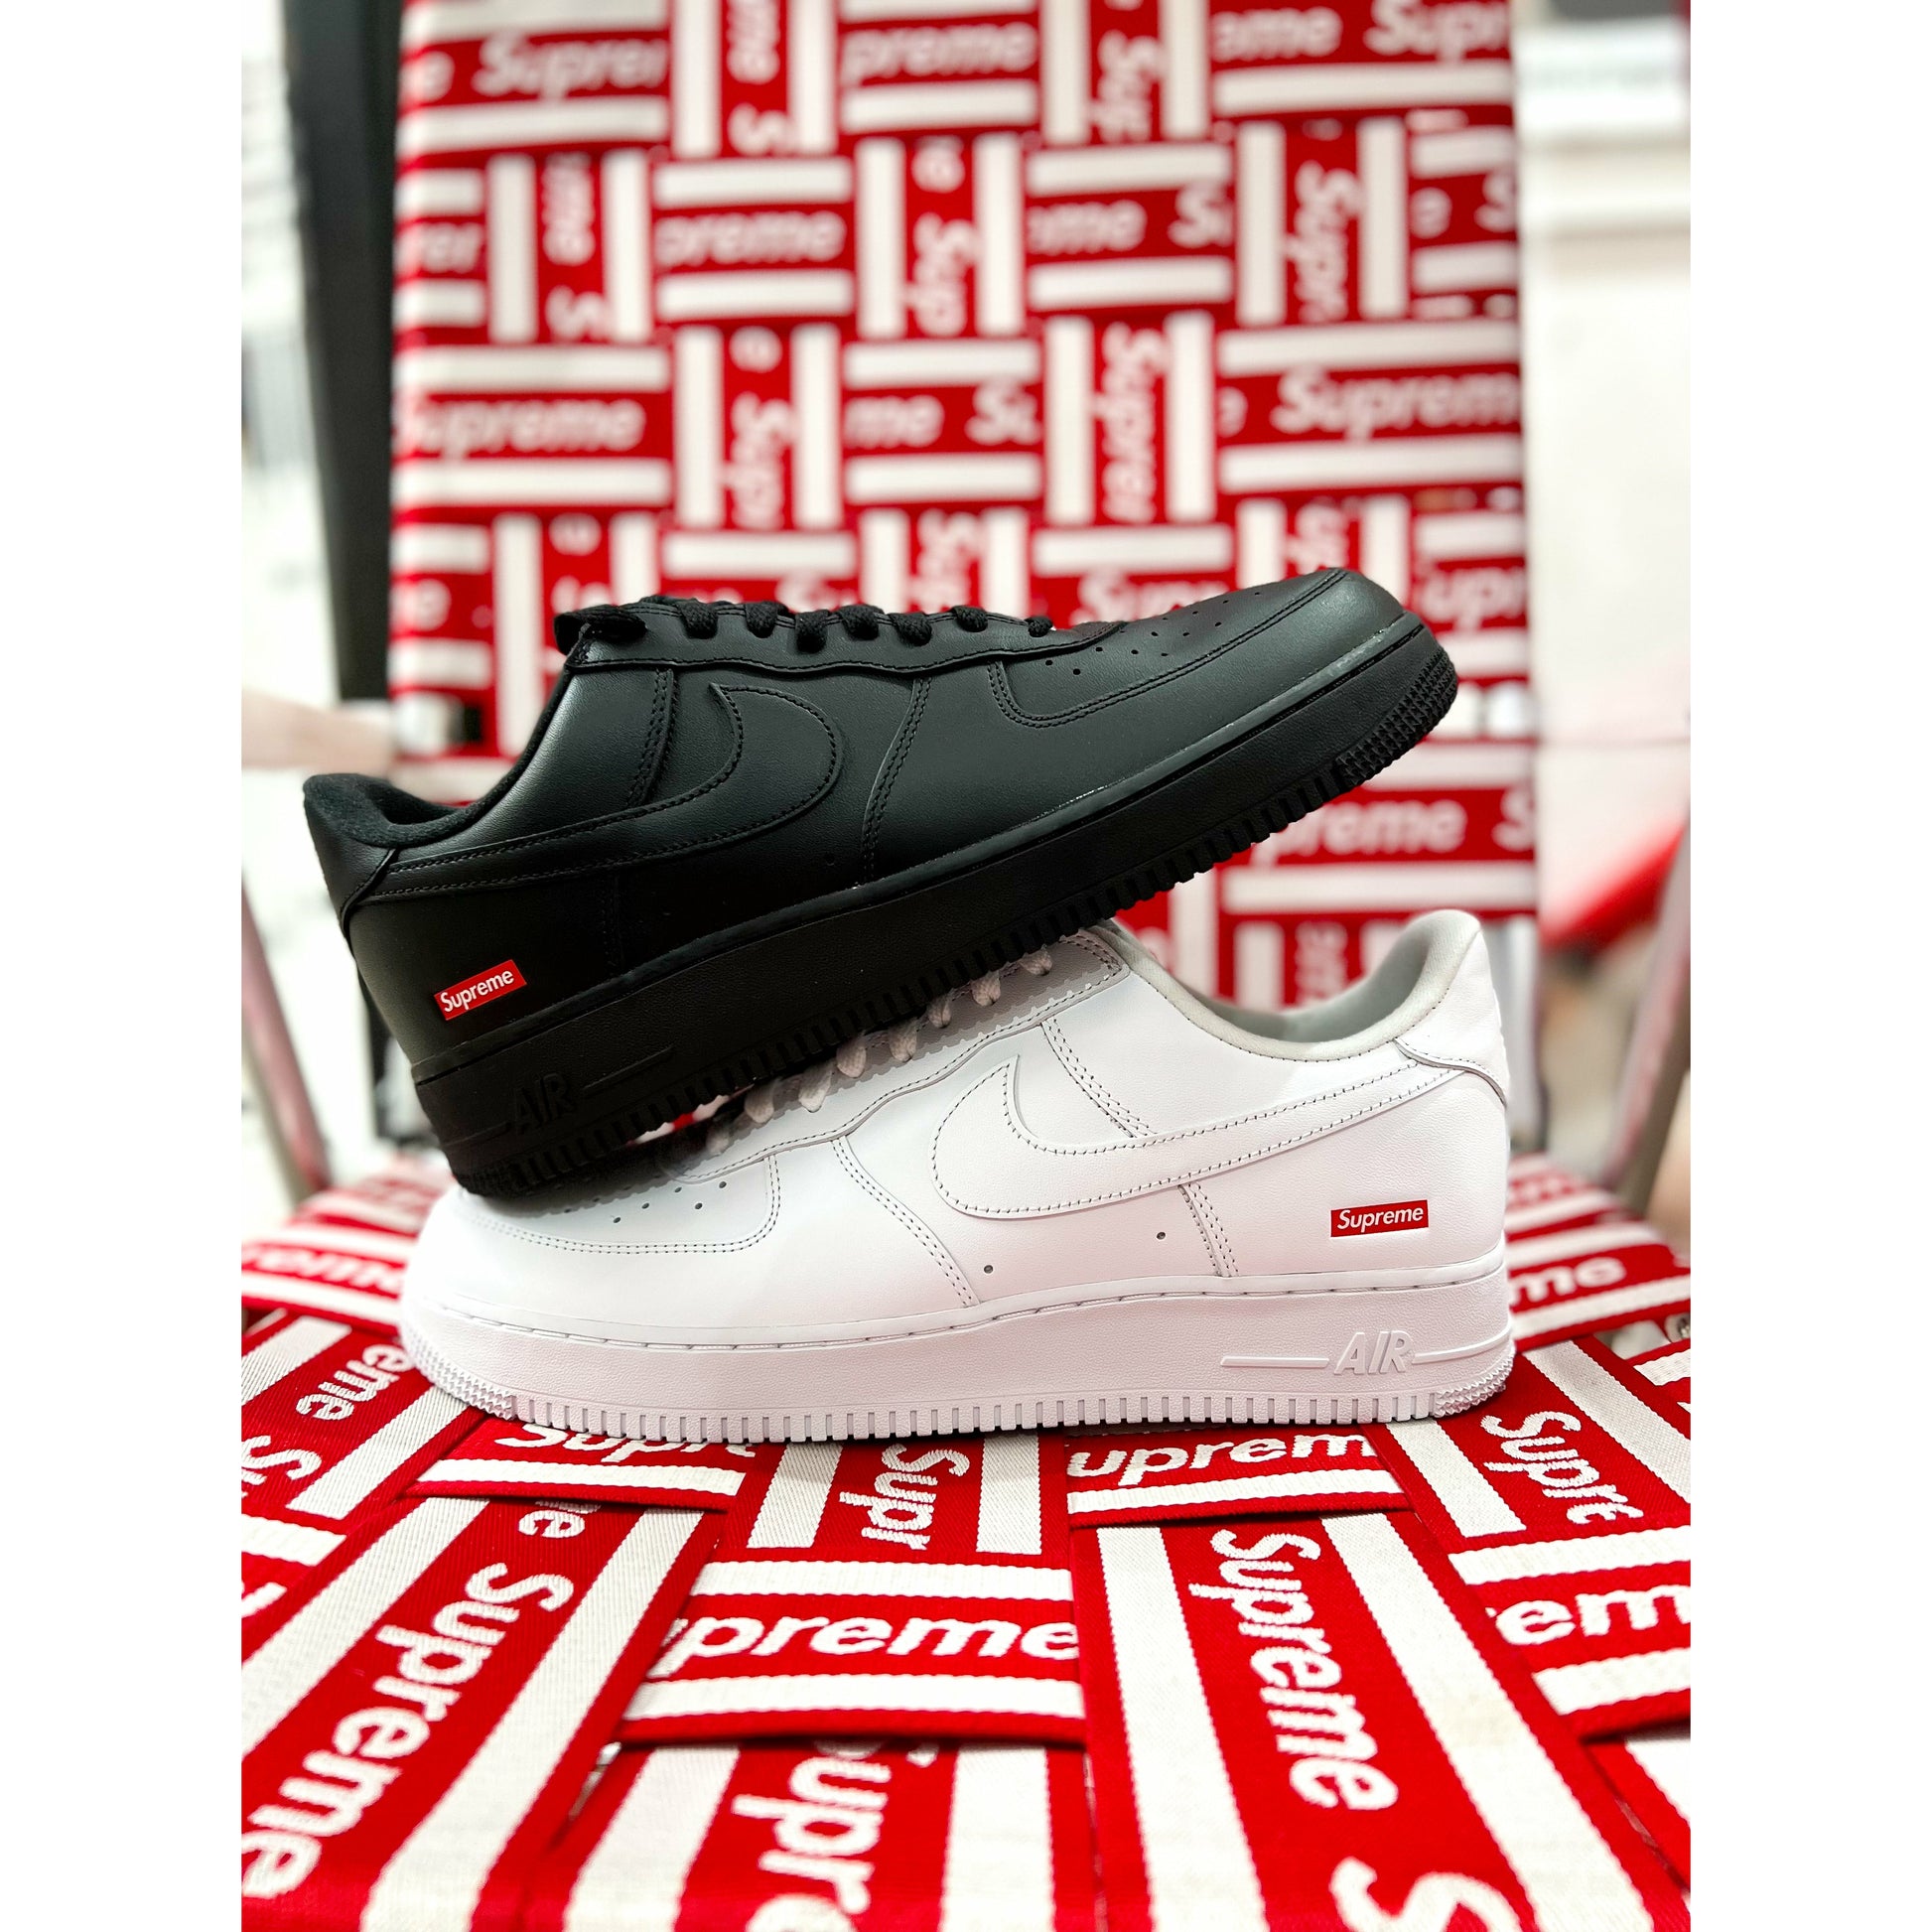 Nike Air Force 1 Low '07 Black White for Sale, Authenticity Guaranteed